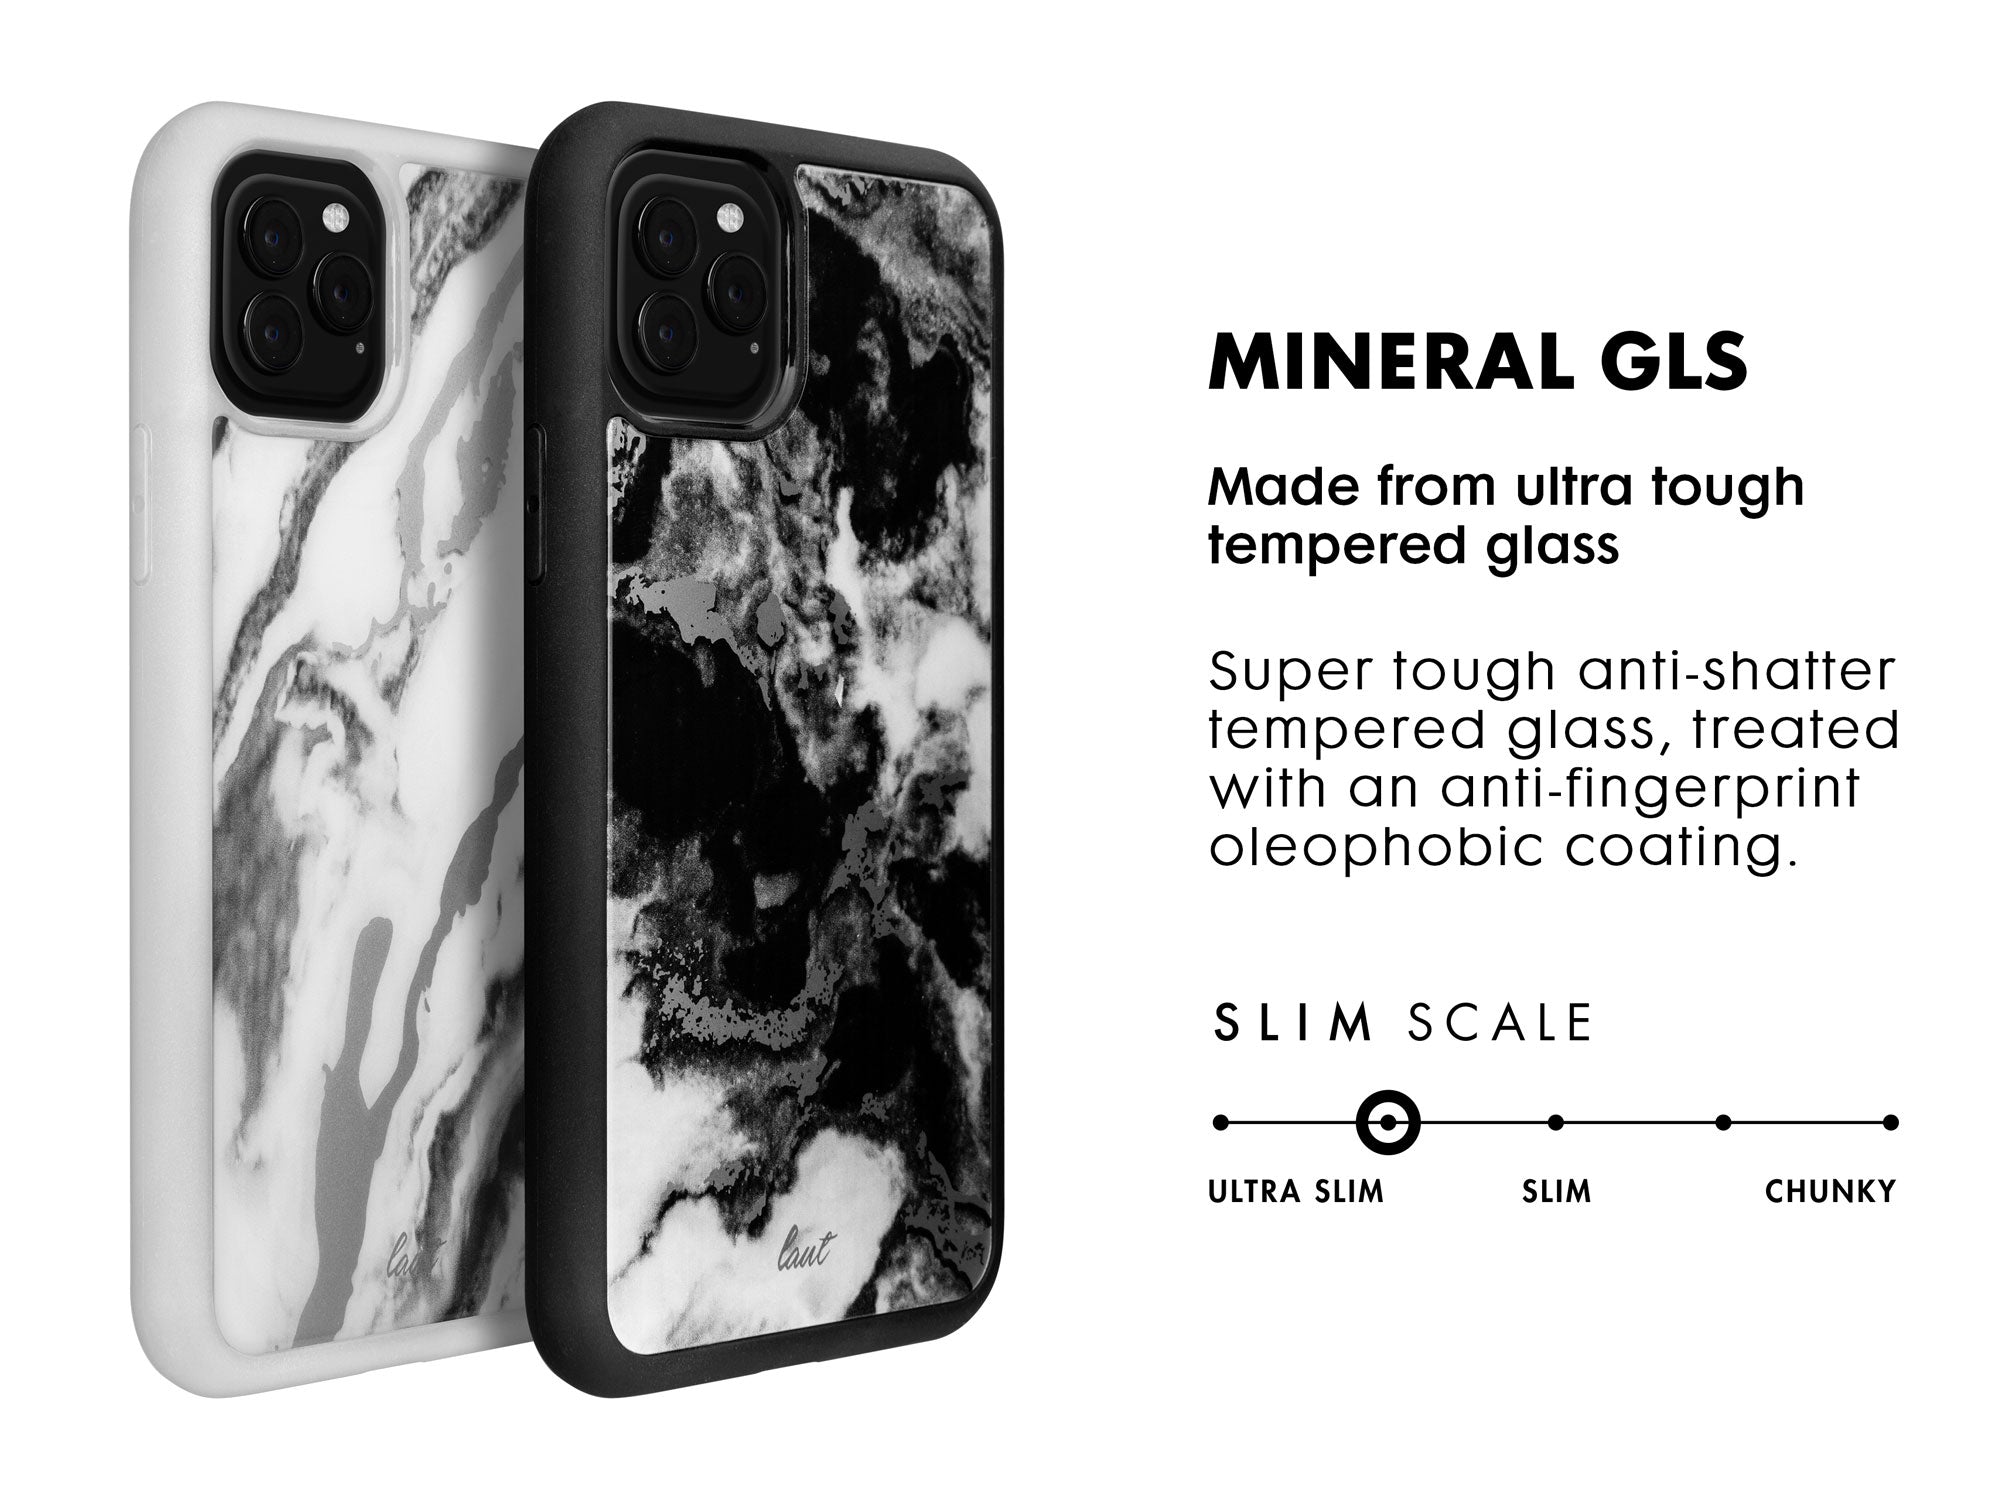 Mineral Glass for iPhone 11 series